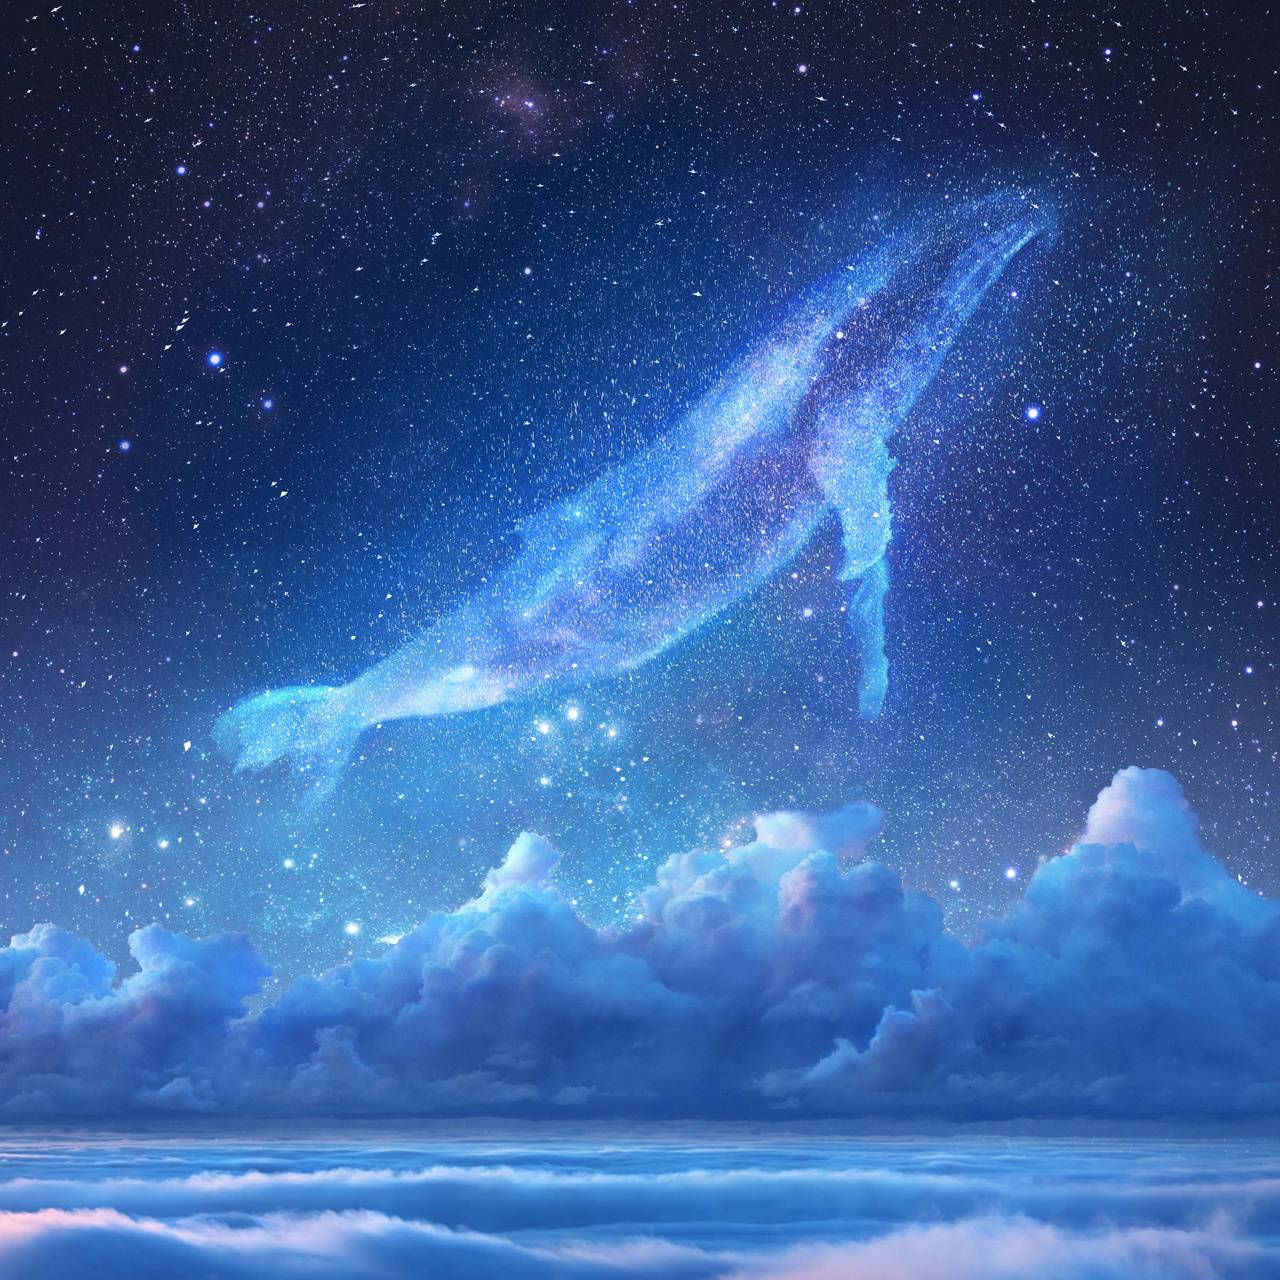 Whale in the Sky wallpaper